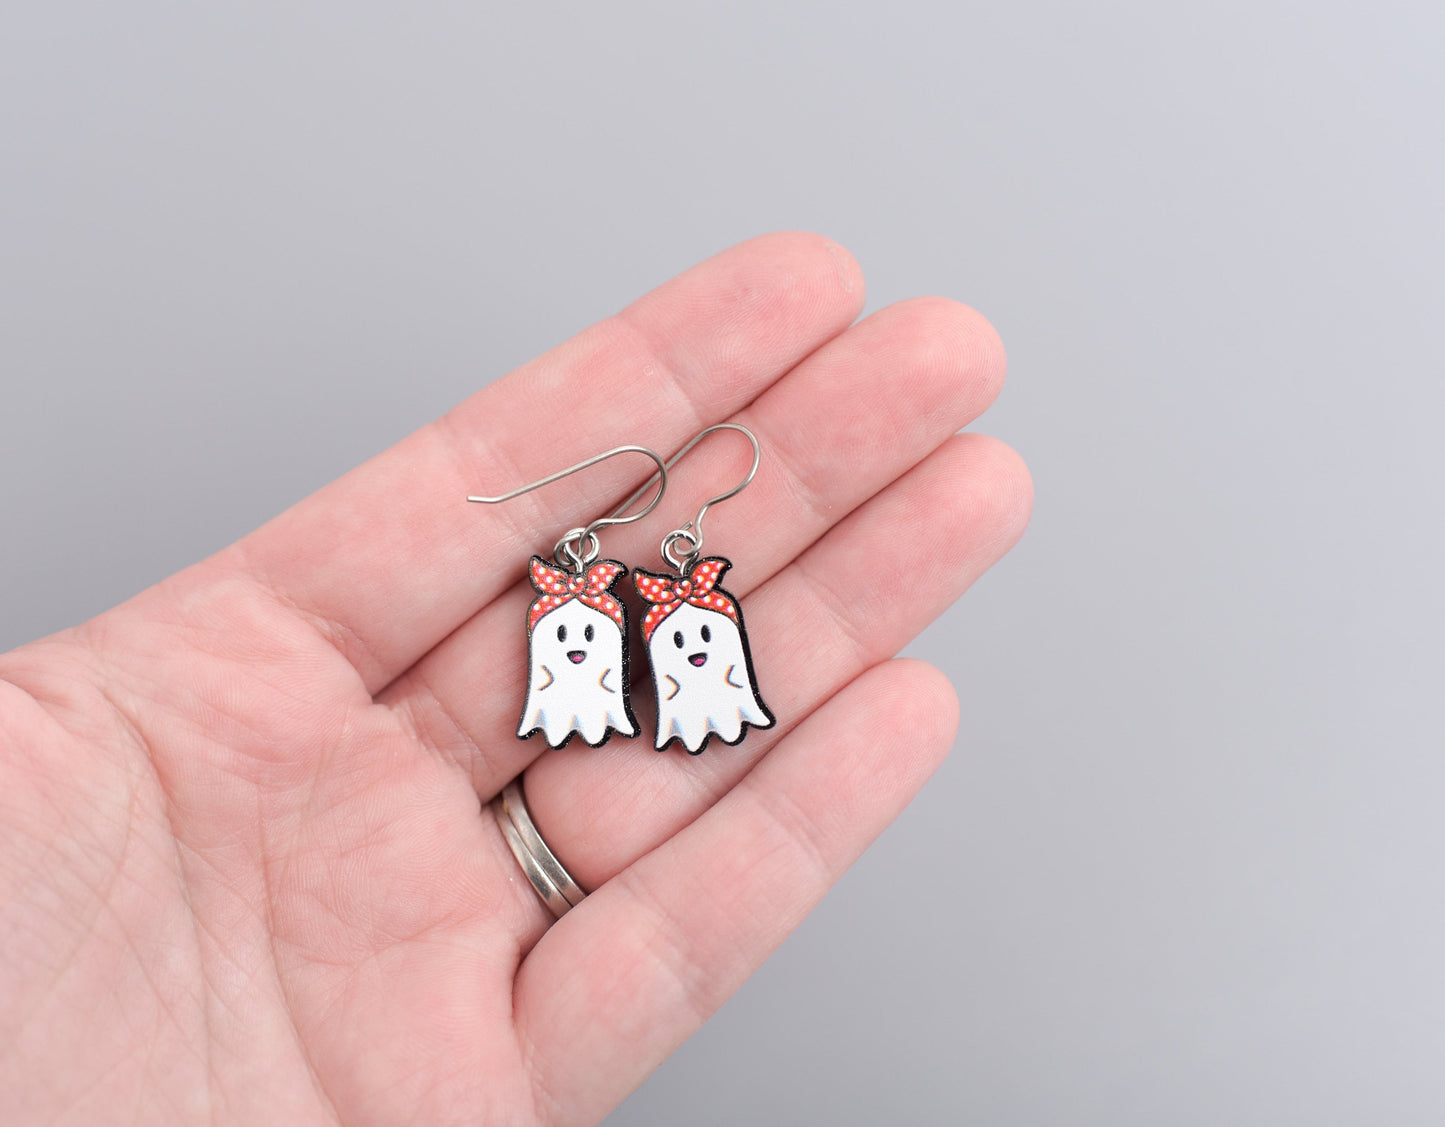 Retro Ghost Dangle Earrings with Titanium Ear Wires